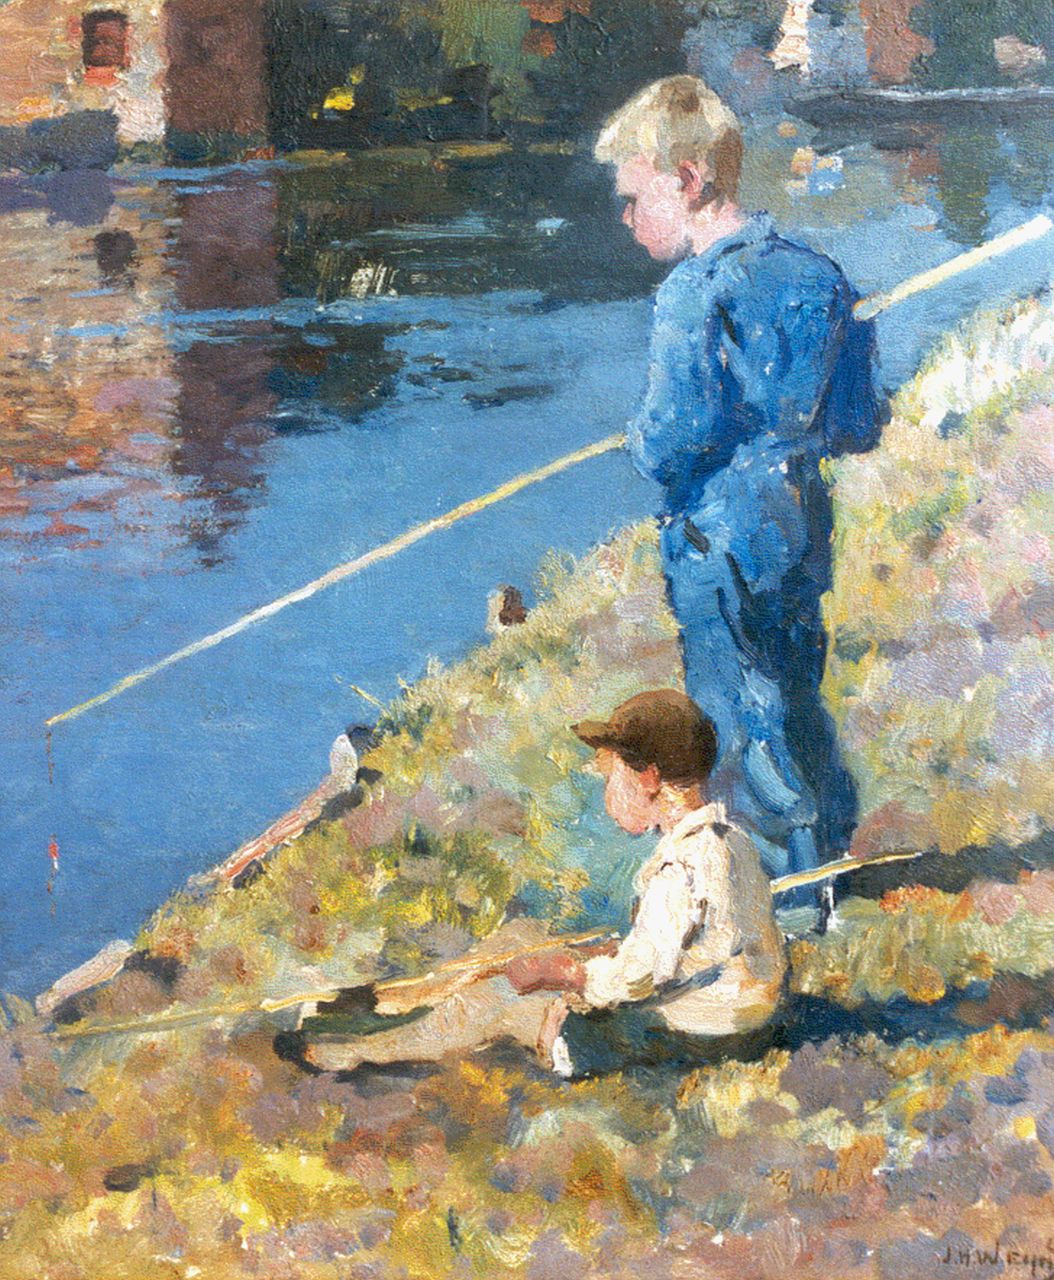 Weijns J.H.  | Jan Harm Weijns, Anglers from Katwijk, Öl auf Malereifaser 39,5 x 34,2 cm, signed l.r. and on the reverse